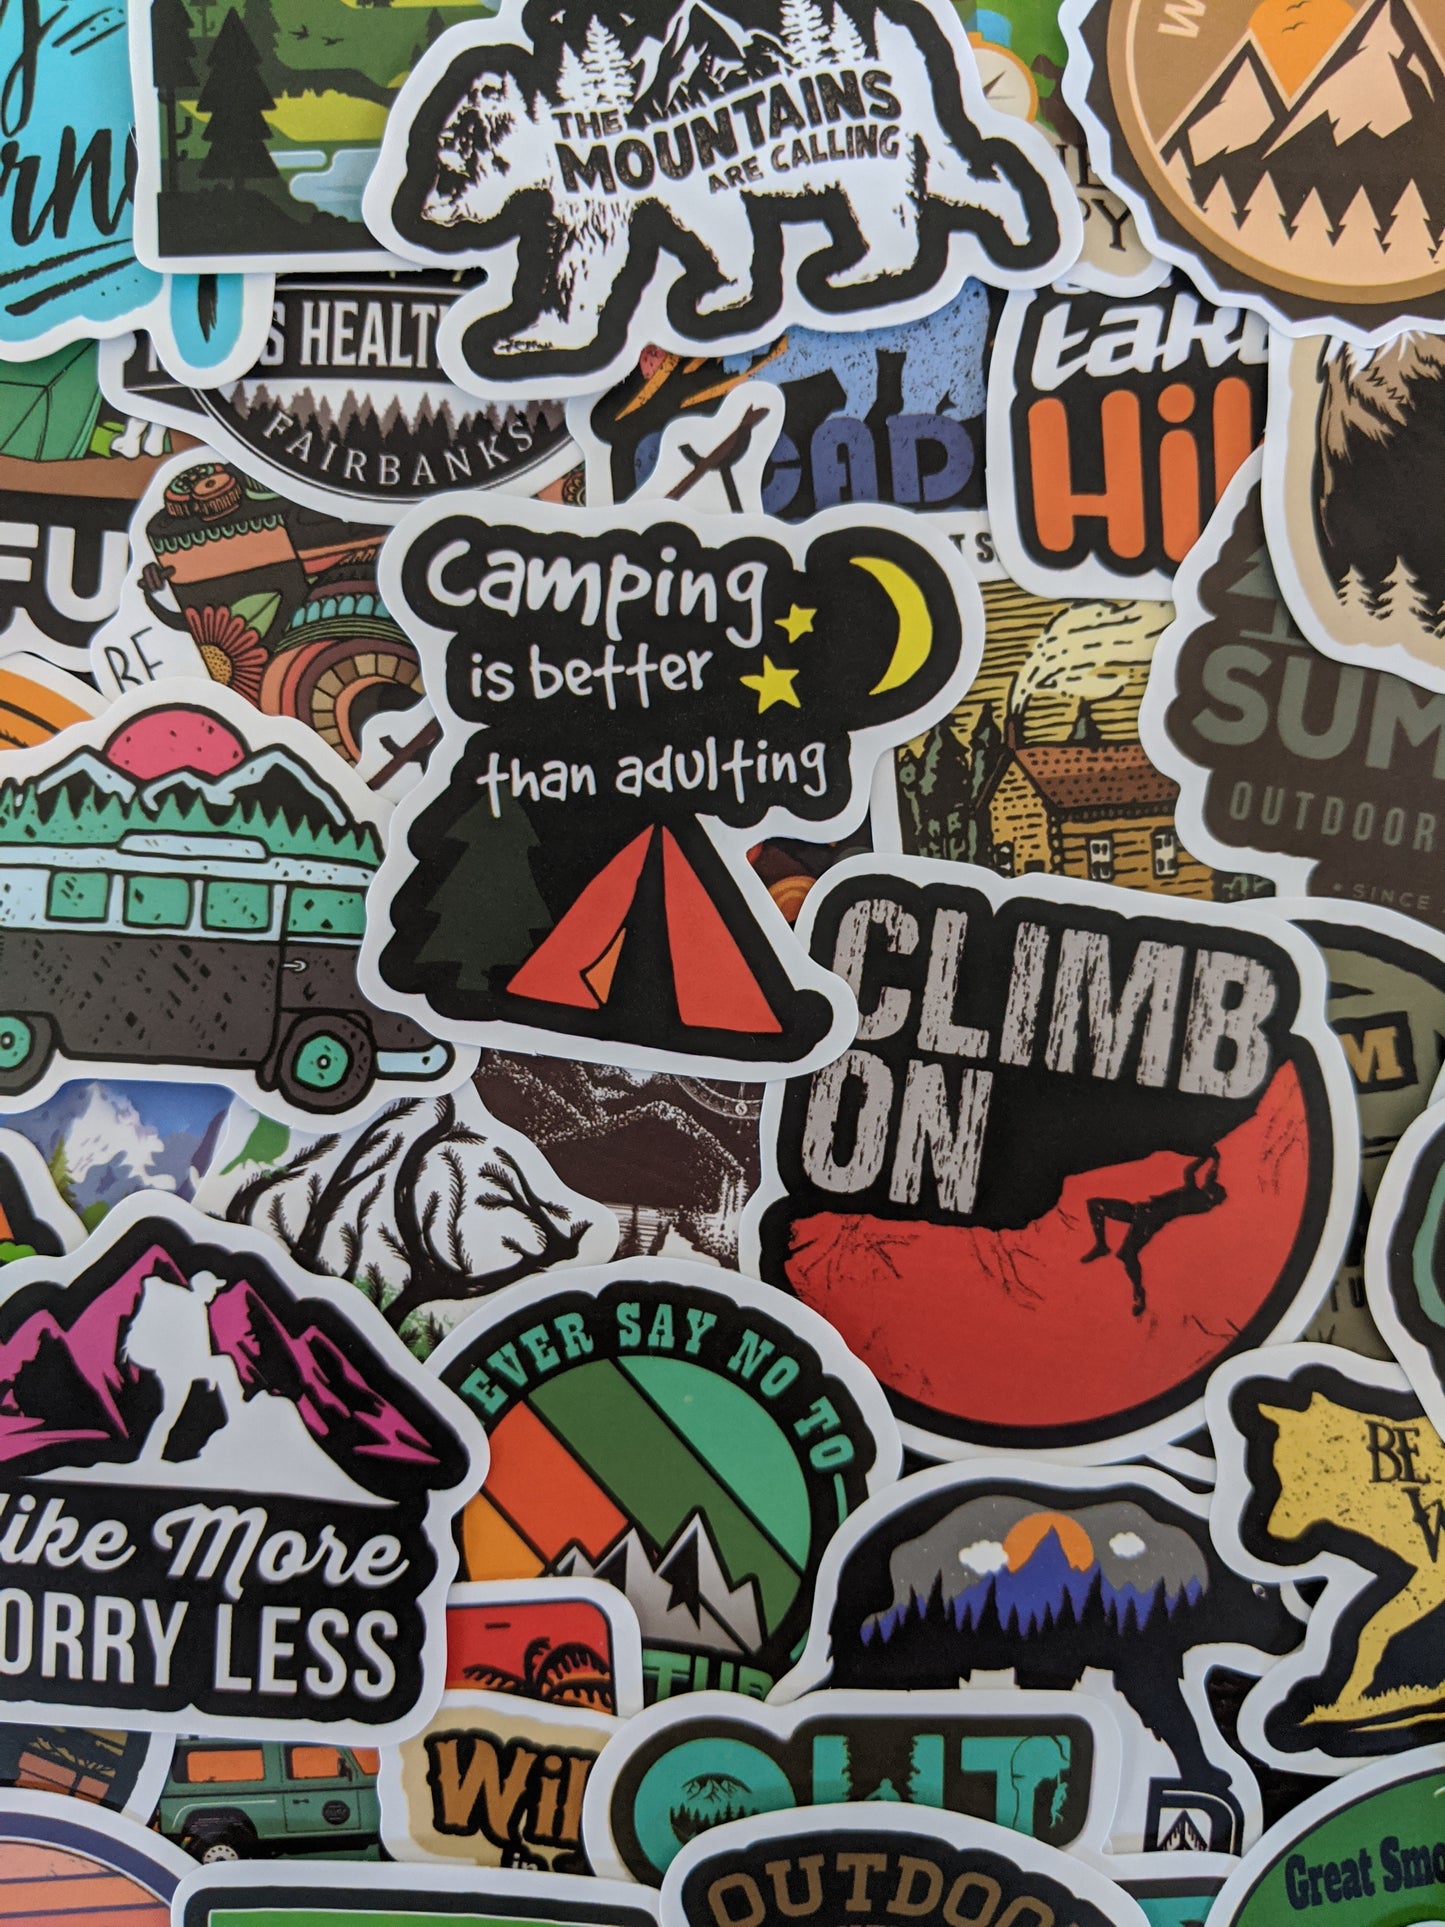 Outdoor Enthusiast Theme Sticker Pack